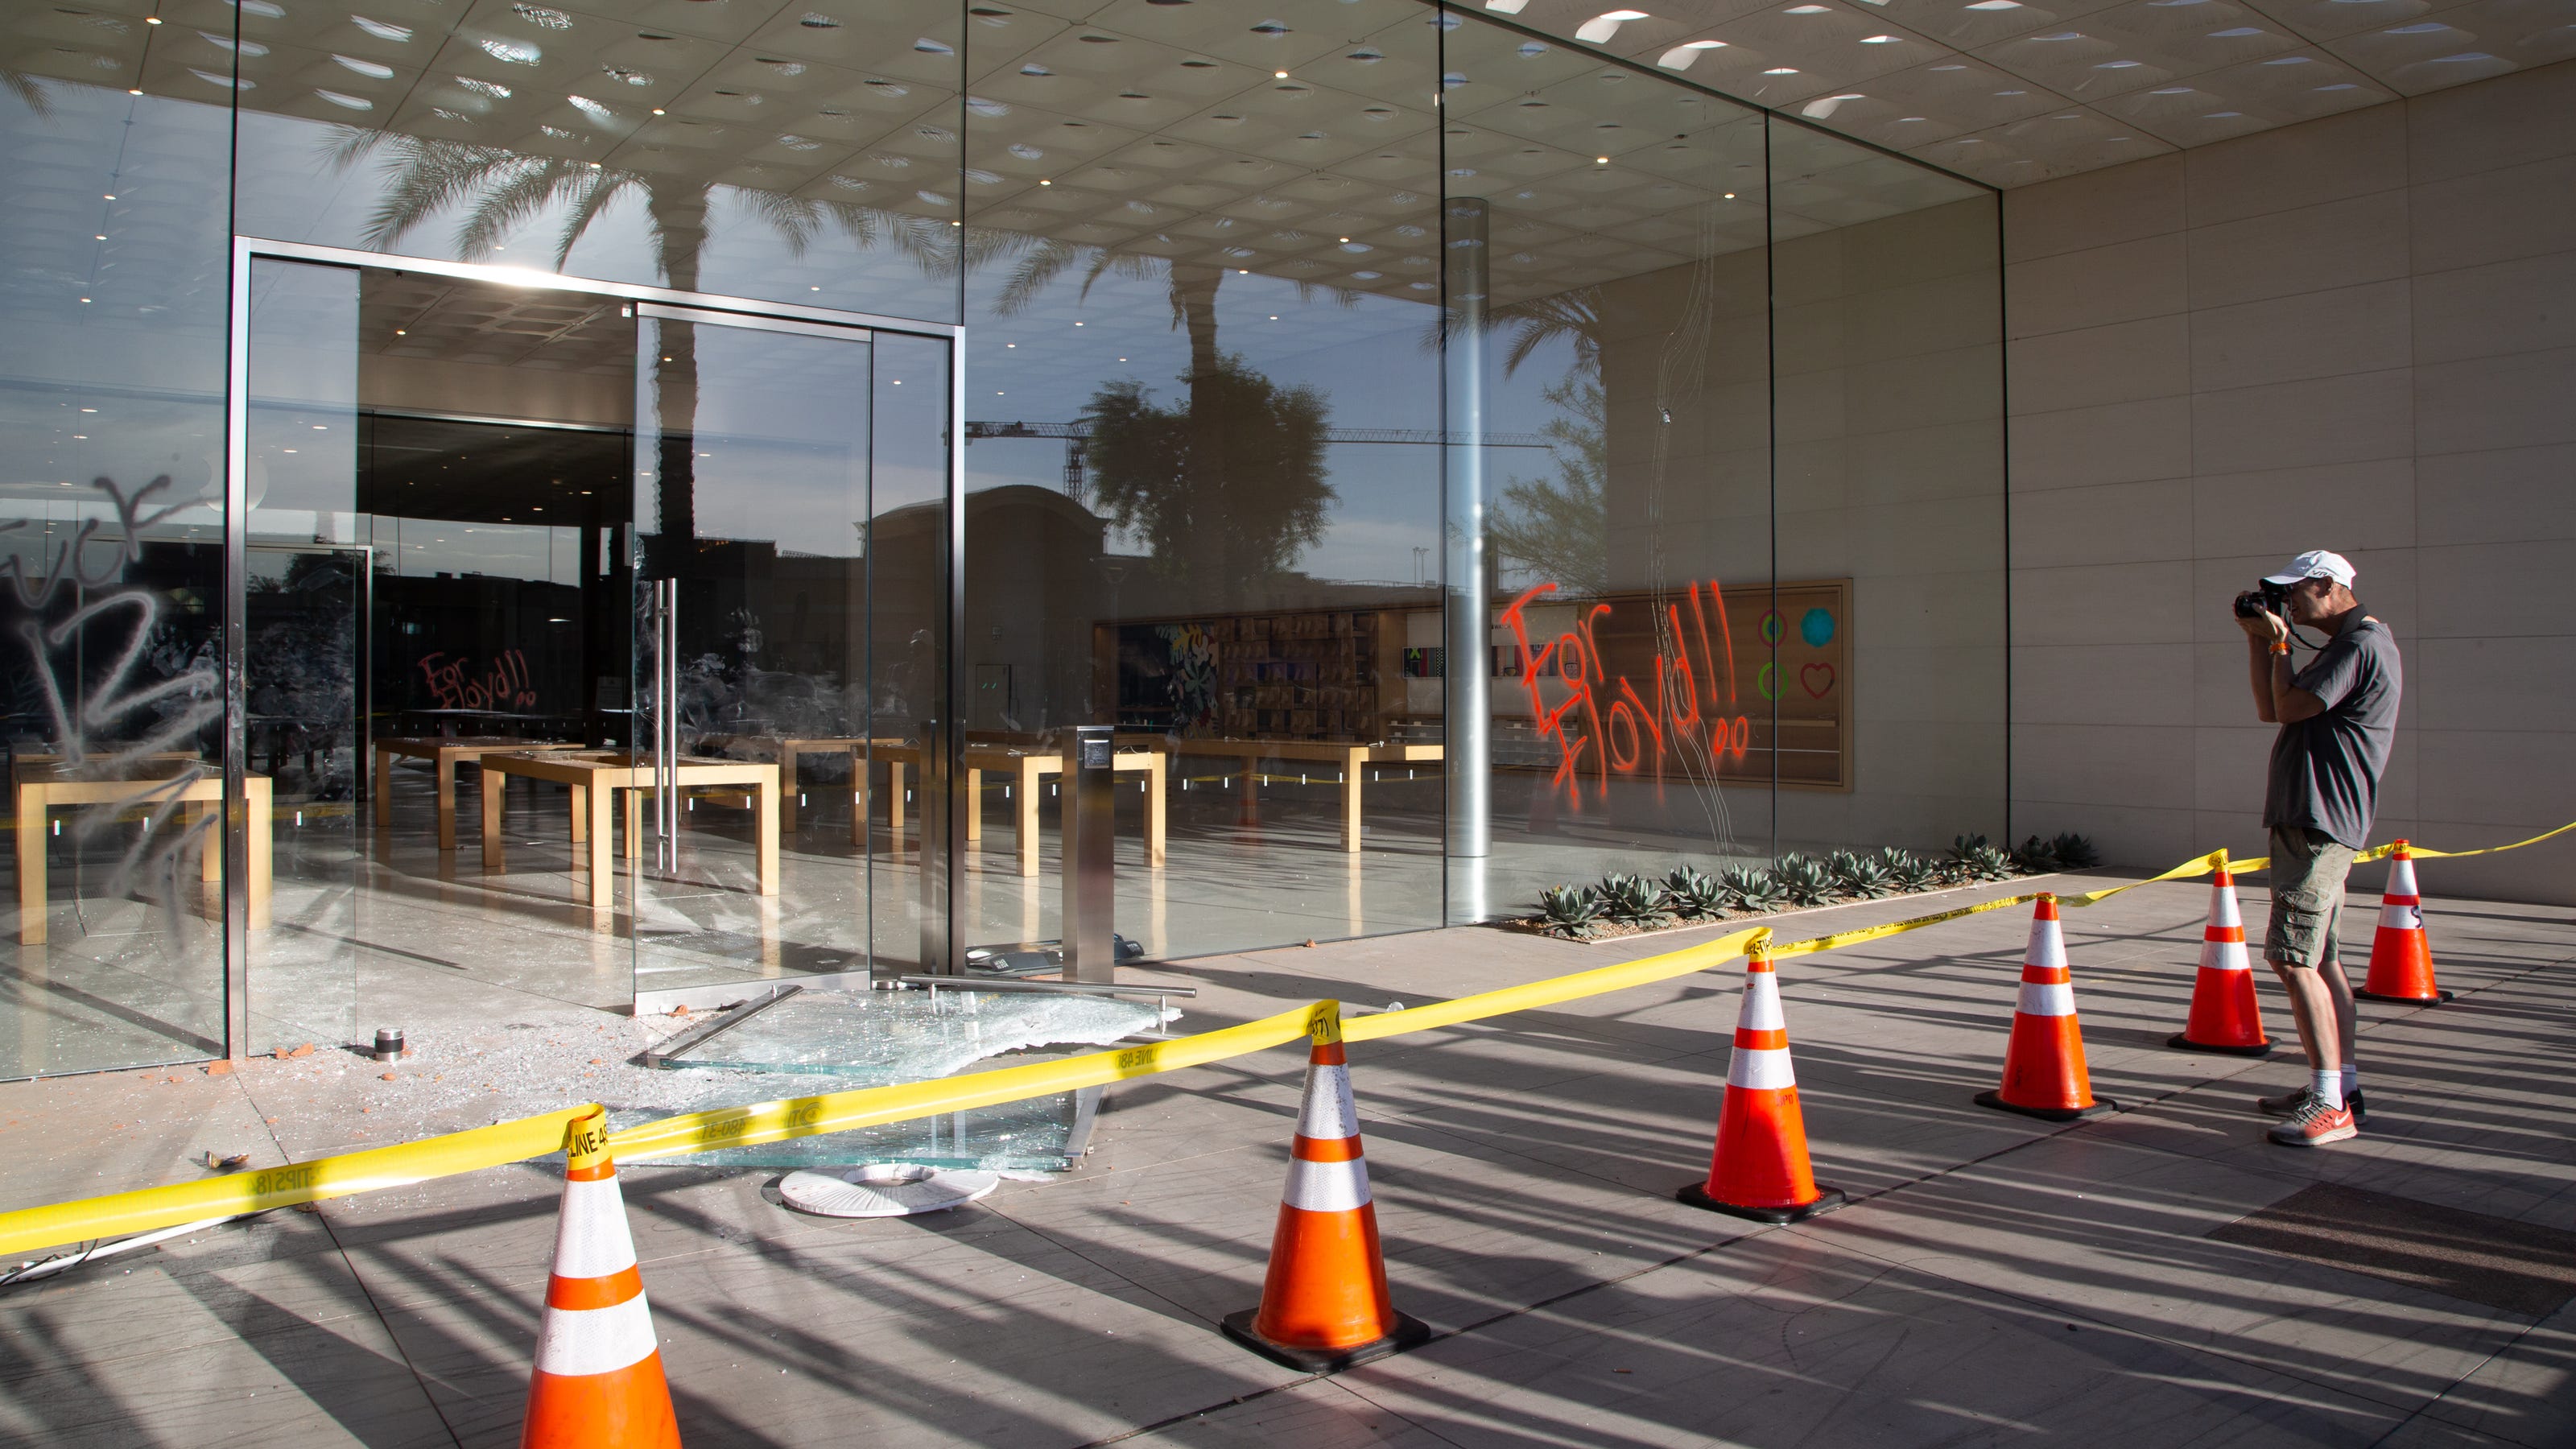 Scottsdale Fashion Square reopens after property damage, looting